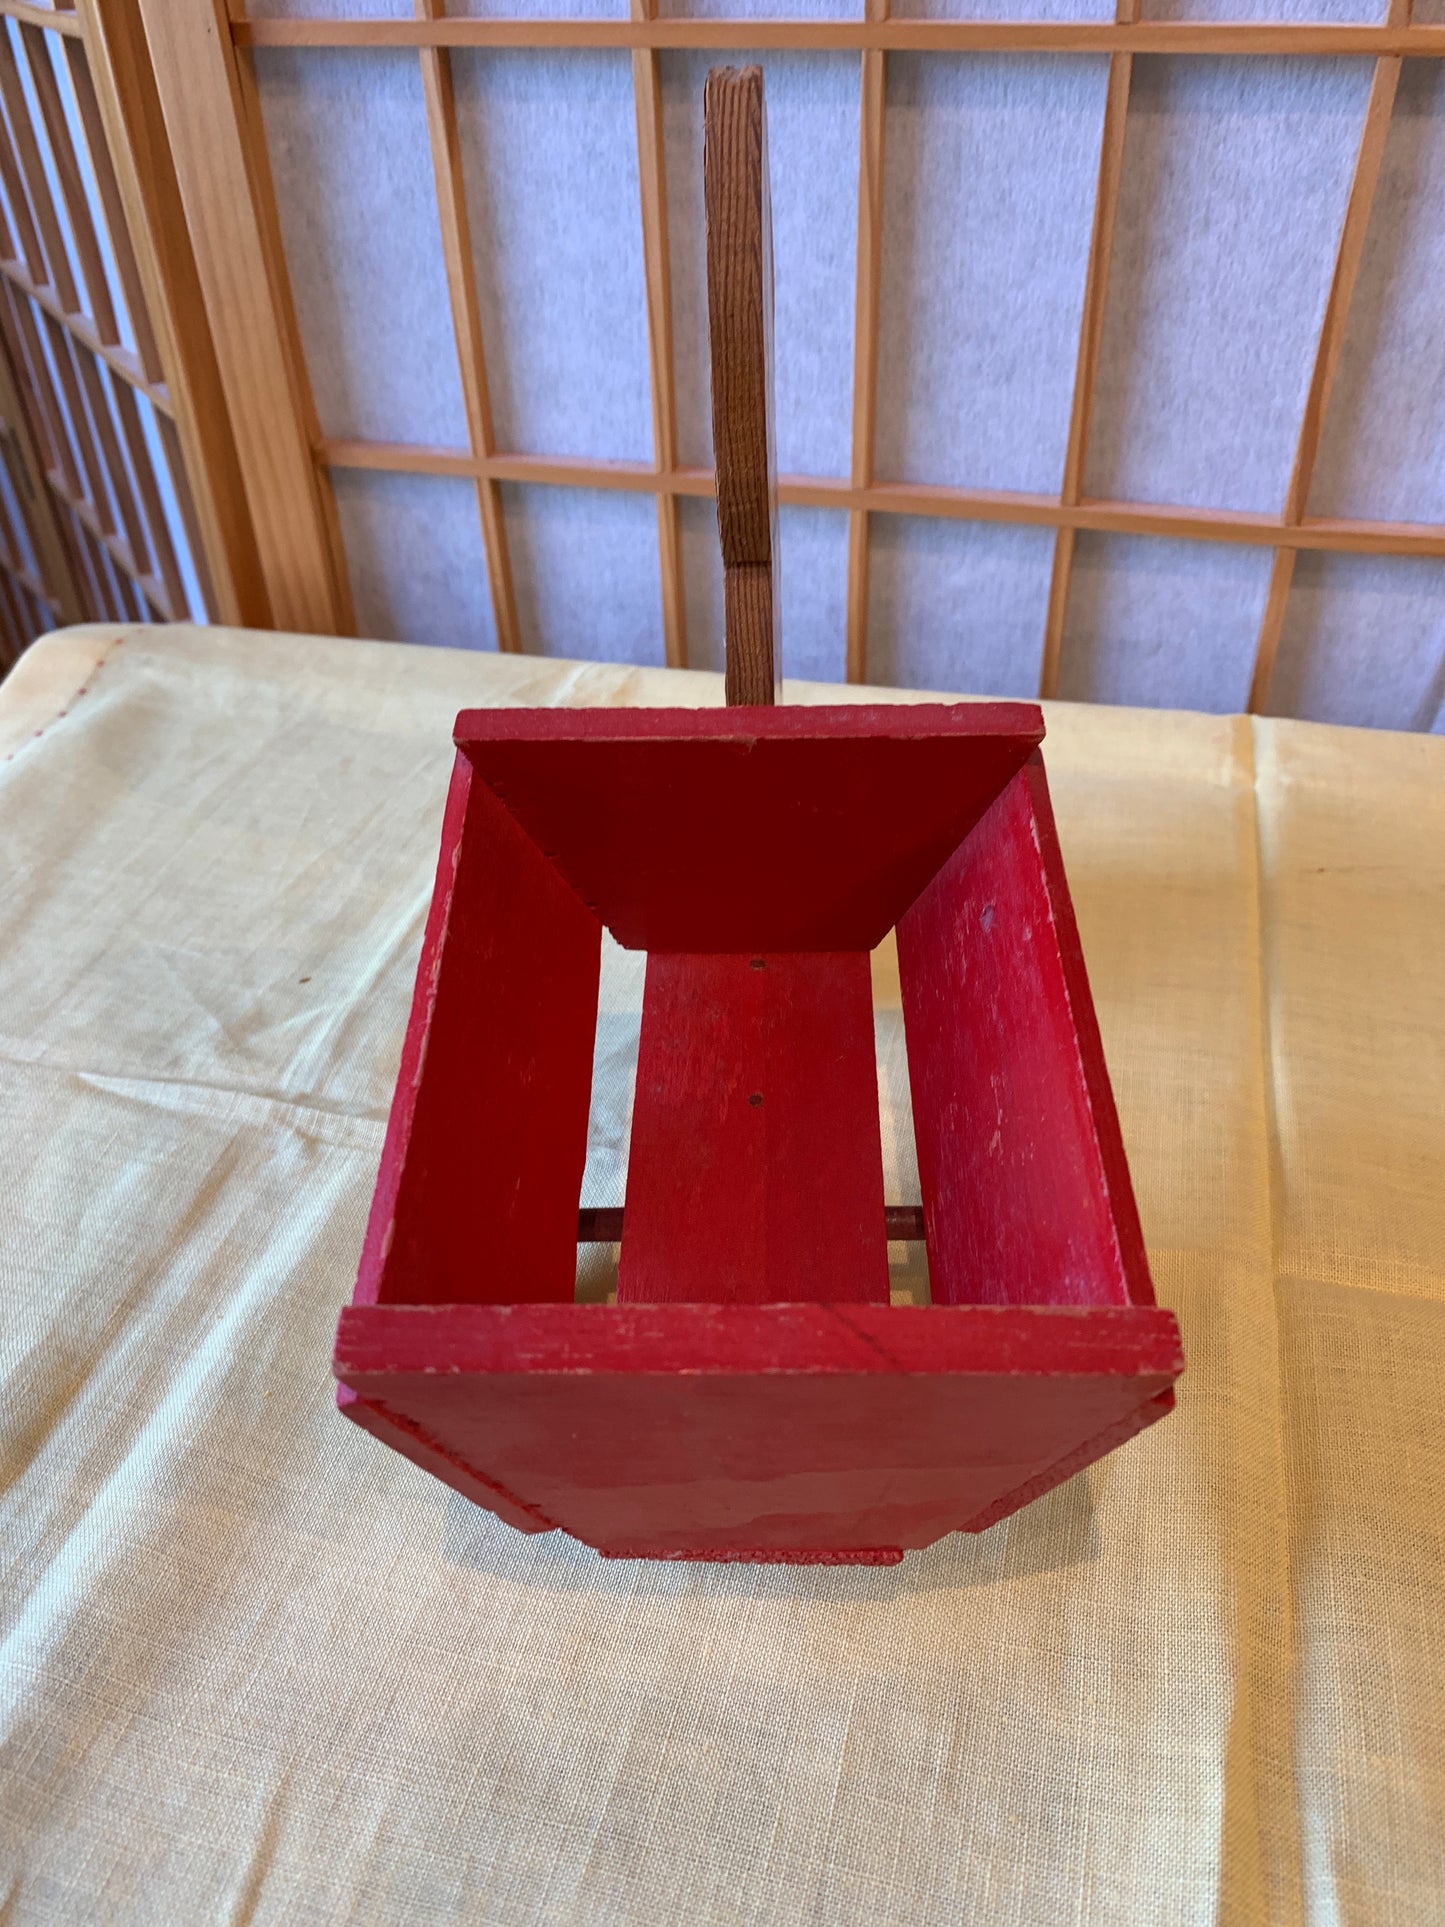 Vintage Wooden Child's Pull Toy, Lamb lithograph, red wagon, good.